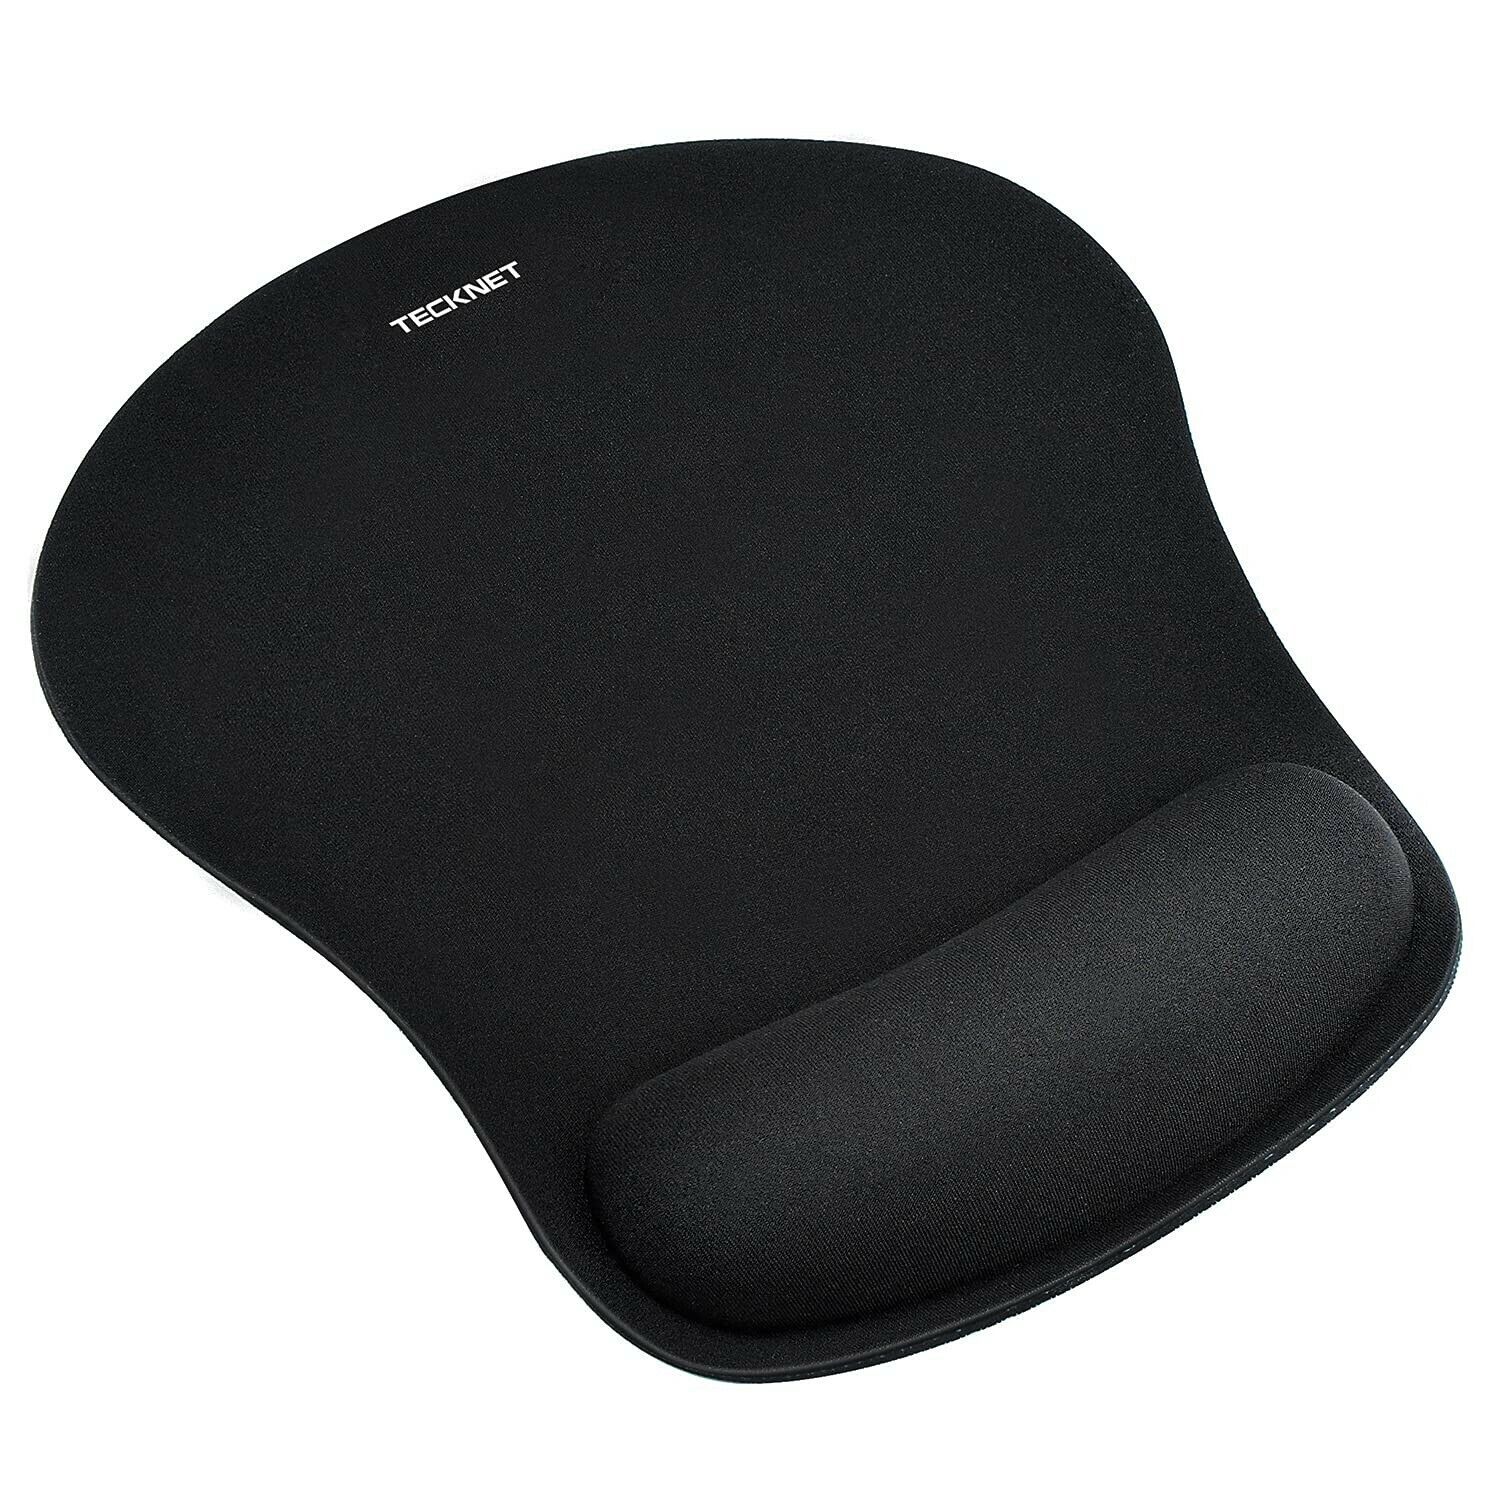 TECKNET Ergonomic Gaming Office Mouse Pad Mat Mousepad with Rest Wrist Suppor...